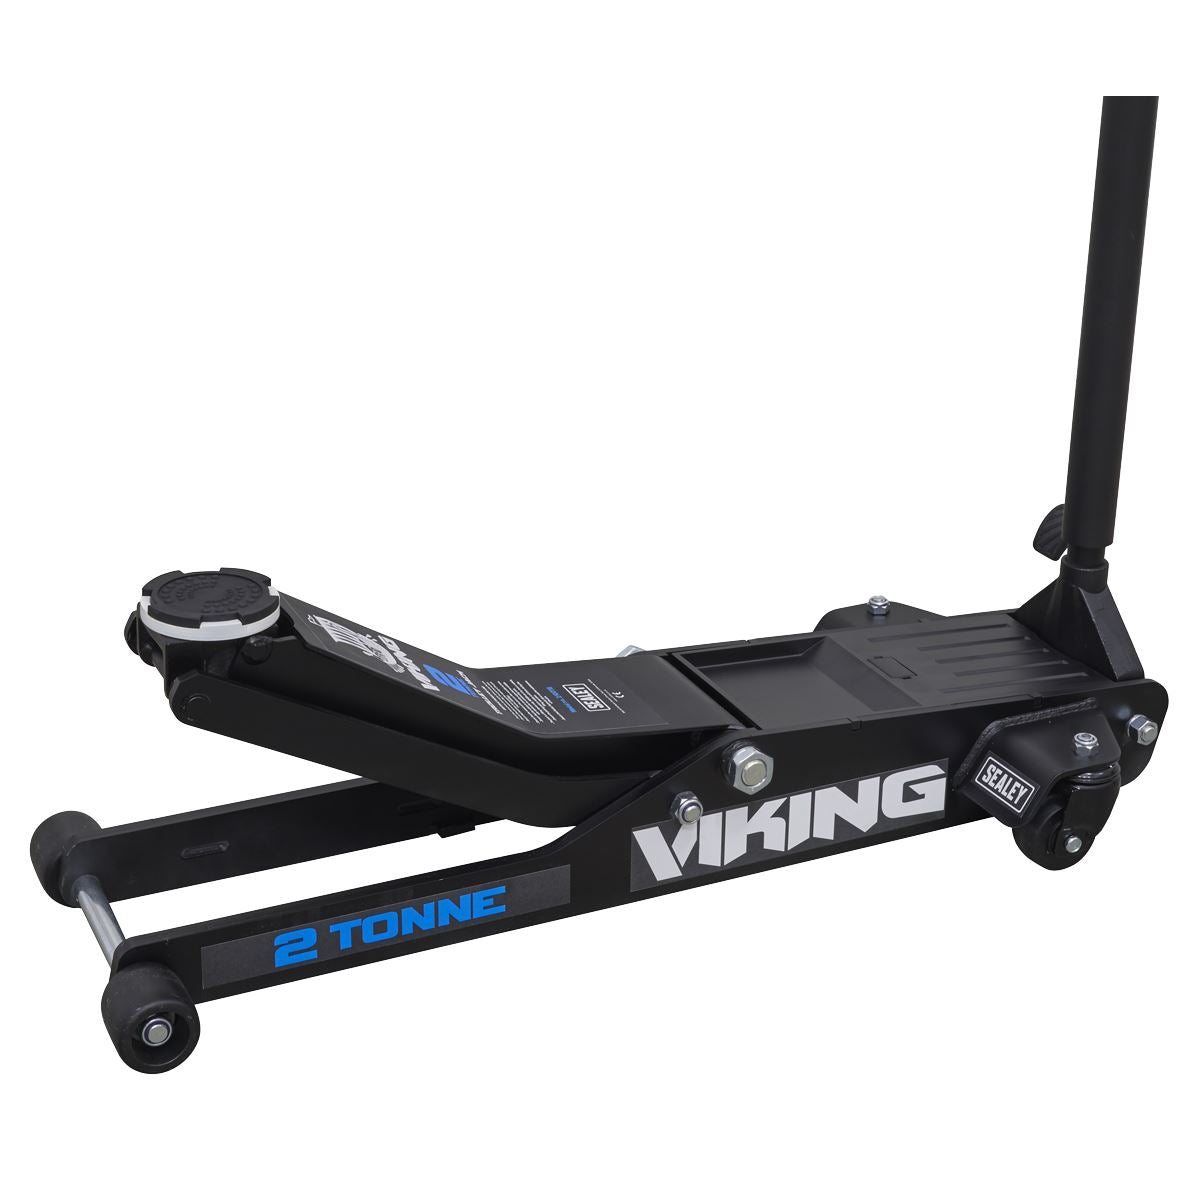 Sealey Viking 2 Tonne Low Entry Long Reach Trolley Jack with Rocket Lift